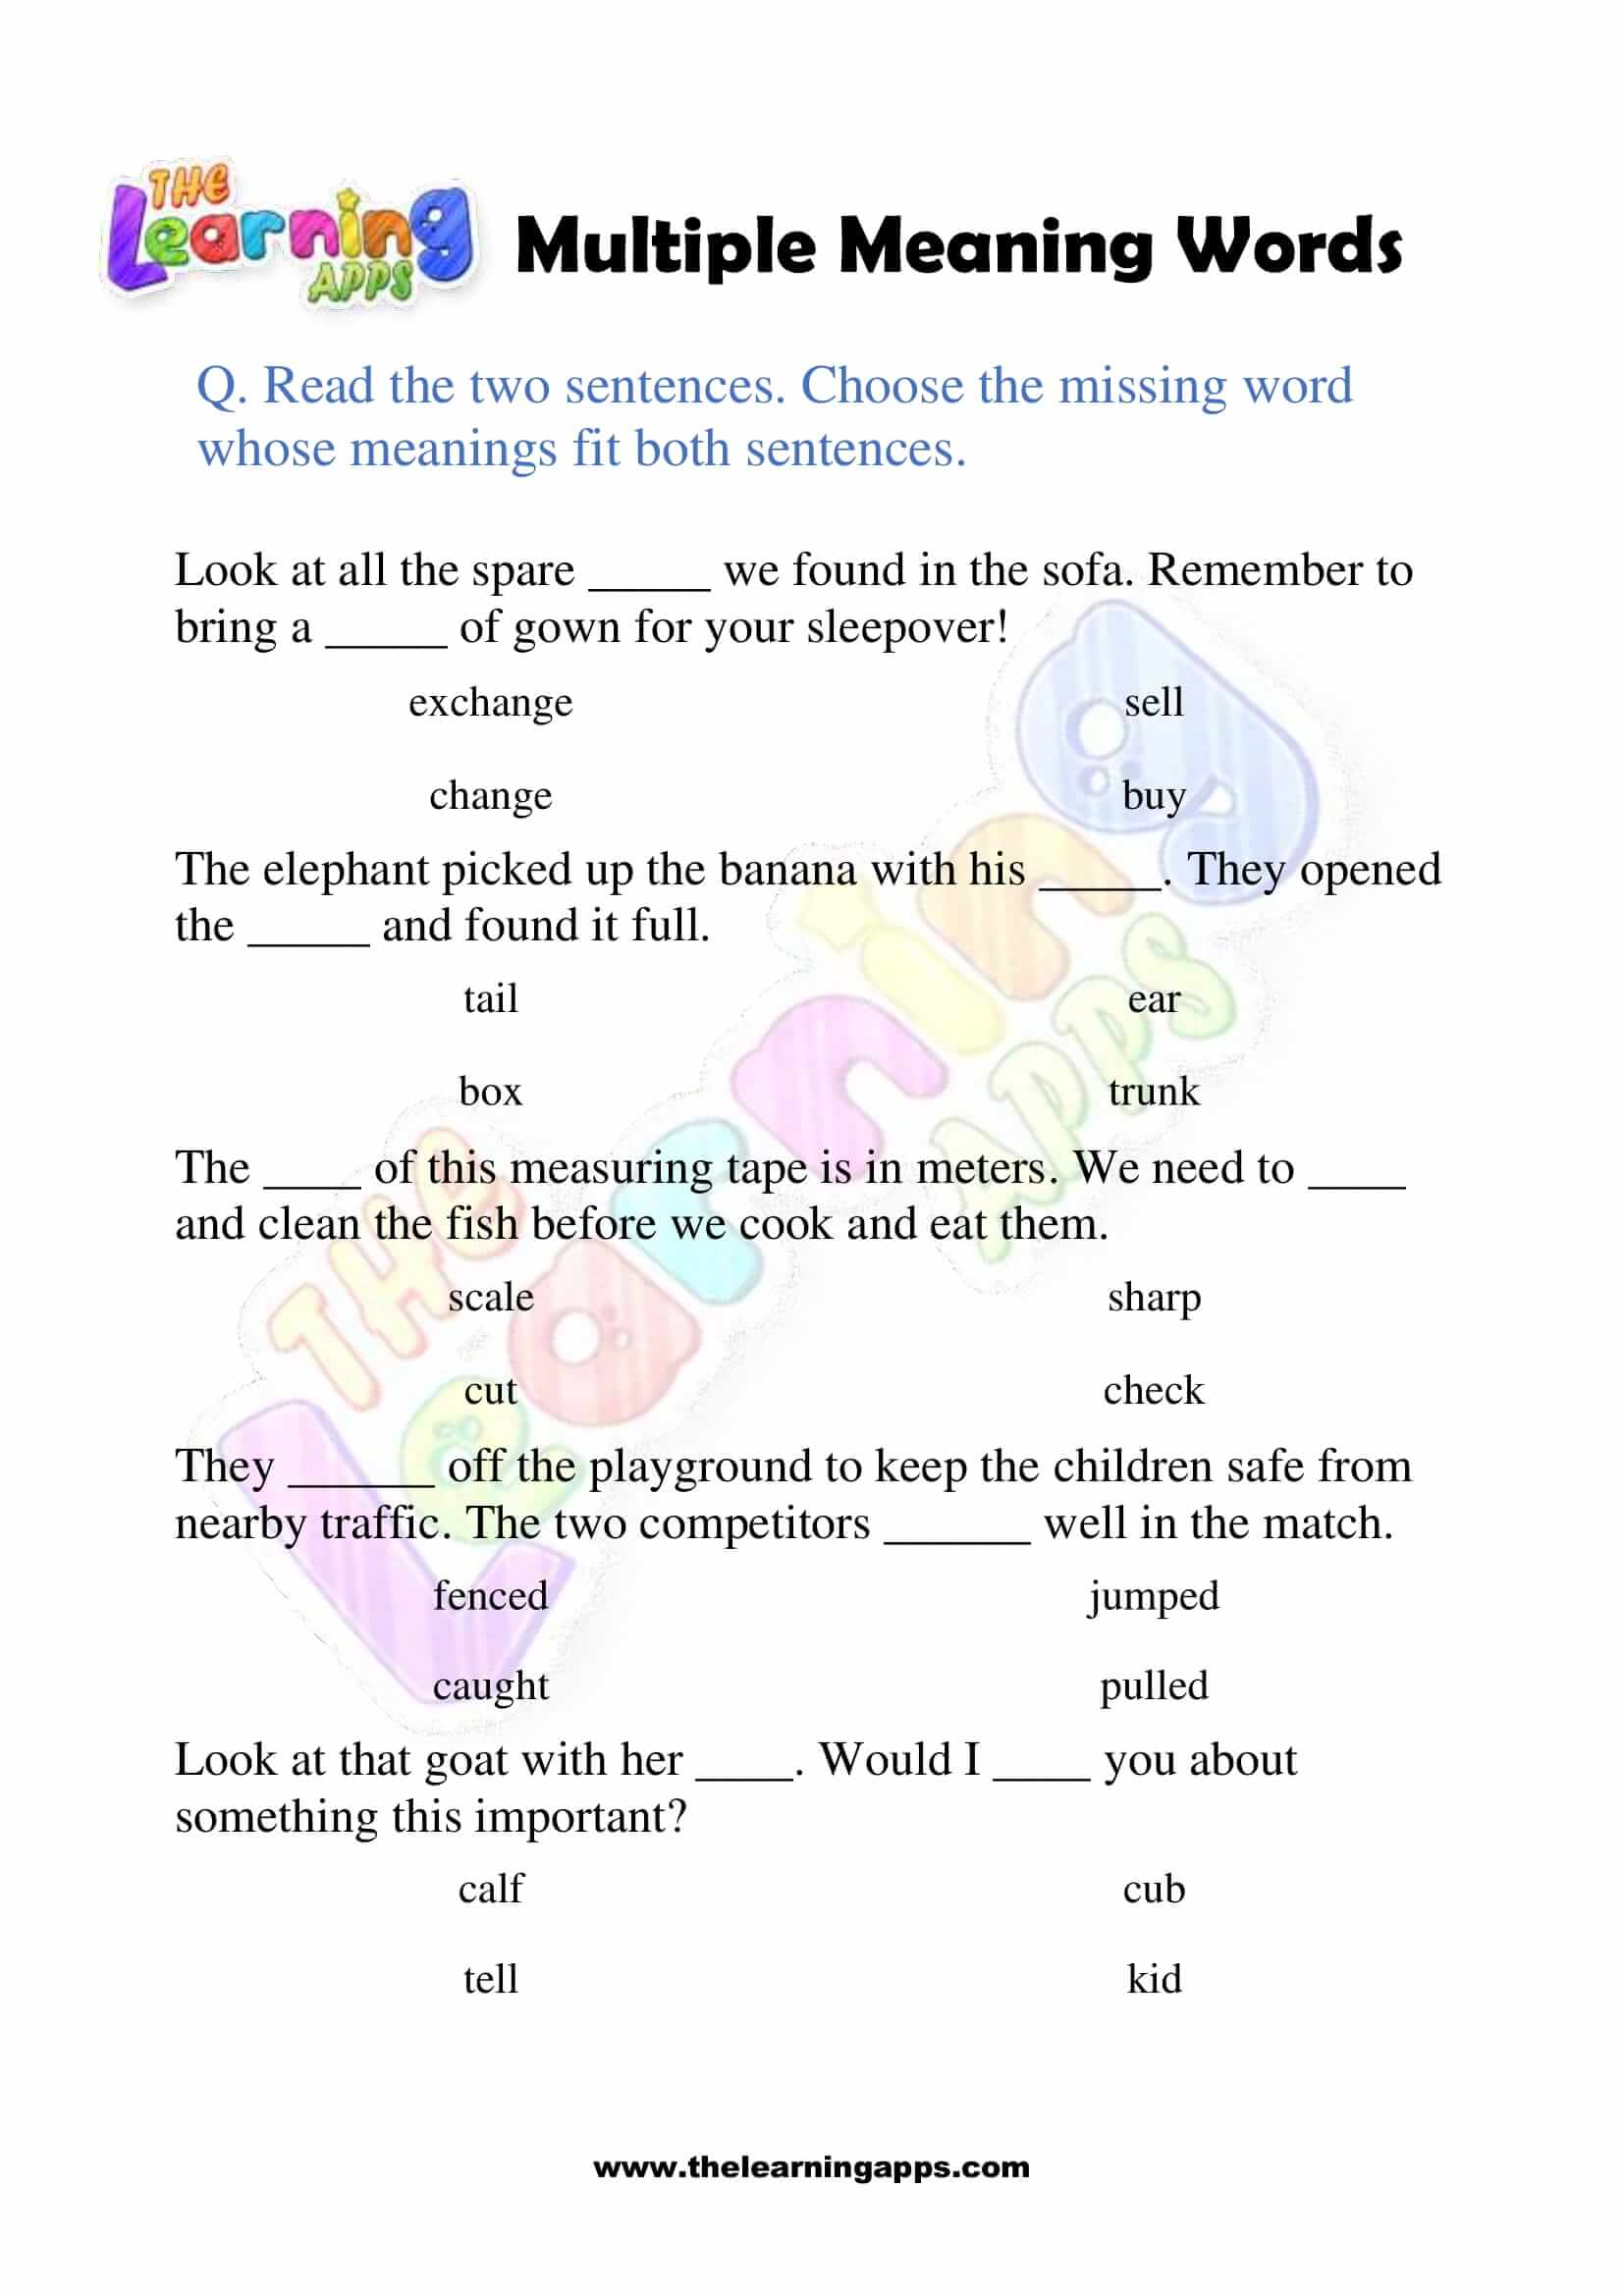 Multiple Meaning Words - Grade 3 - Activity 2